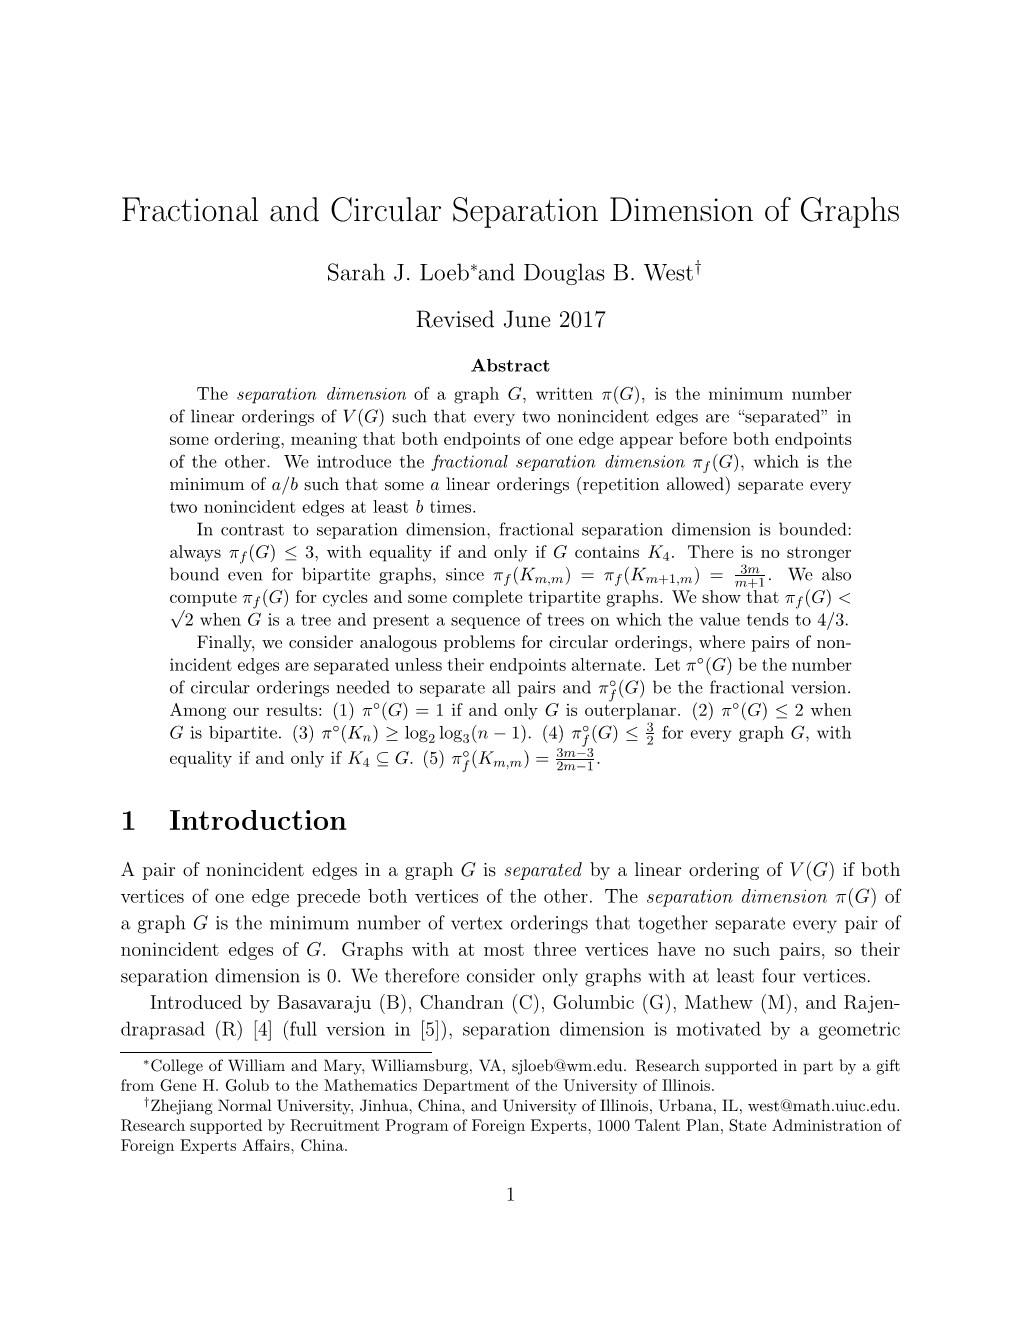 Fractional and Circular Separation Dimension of Graphs